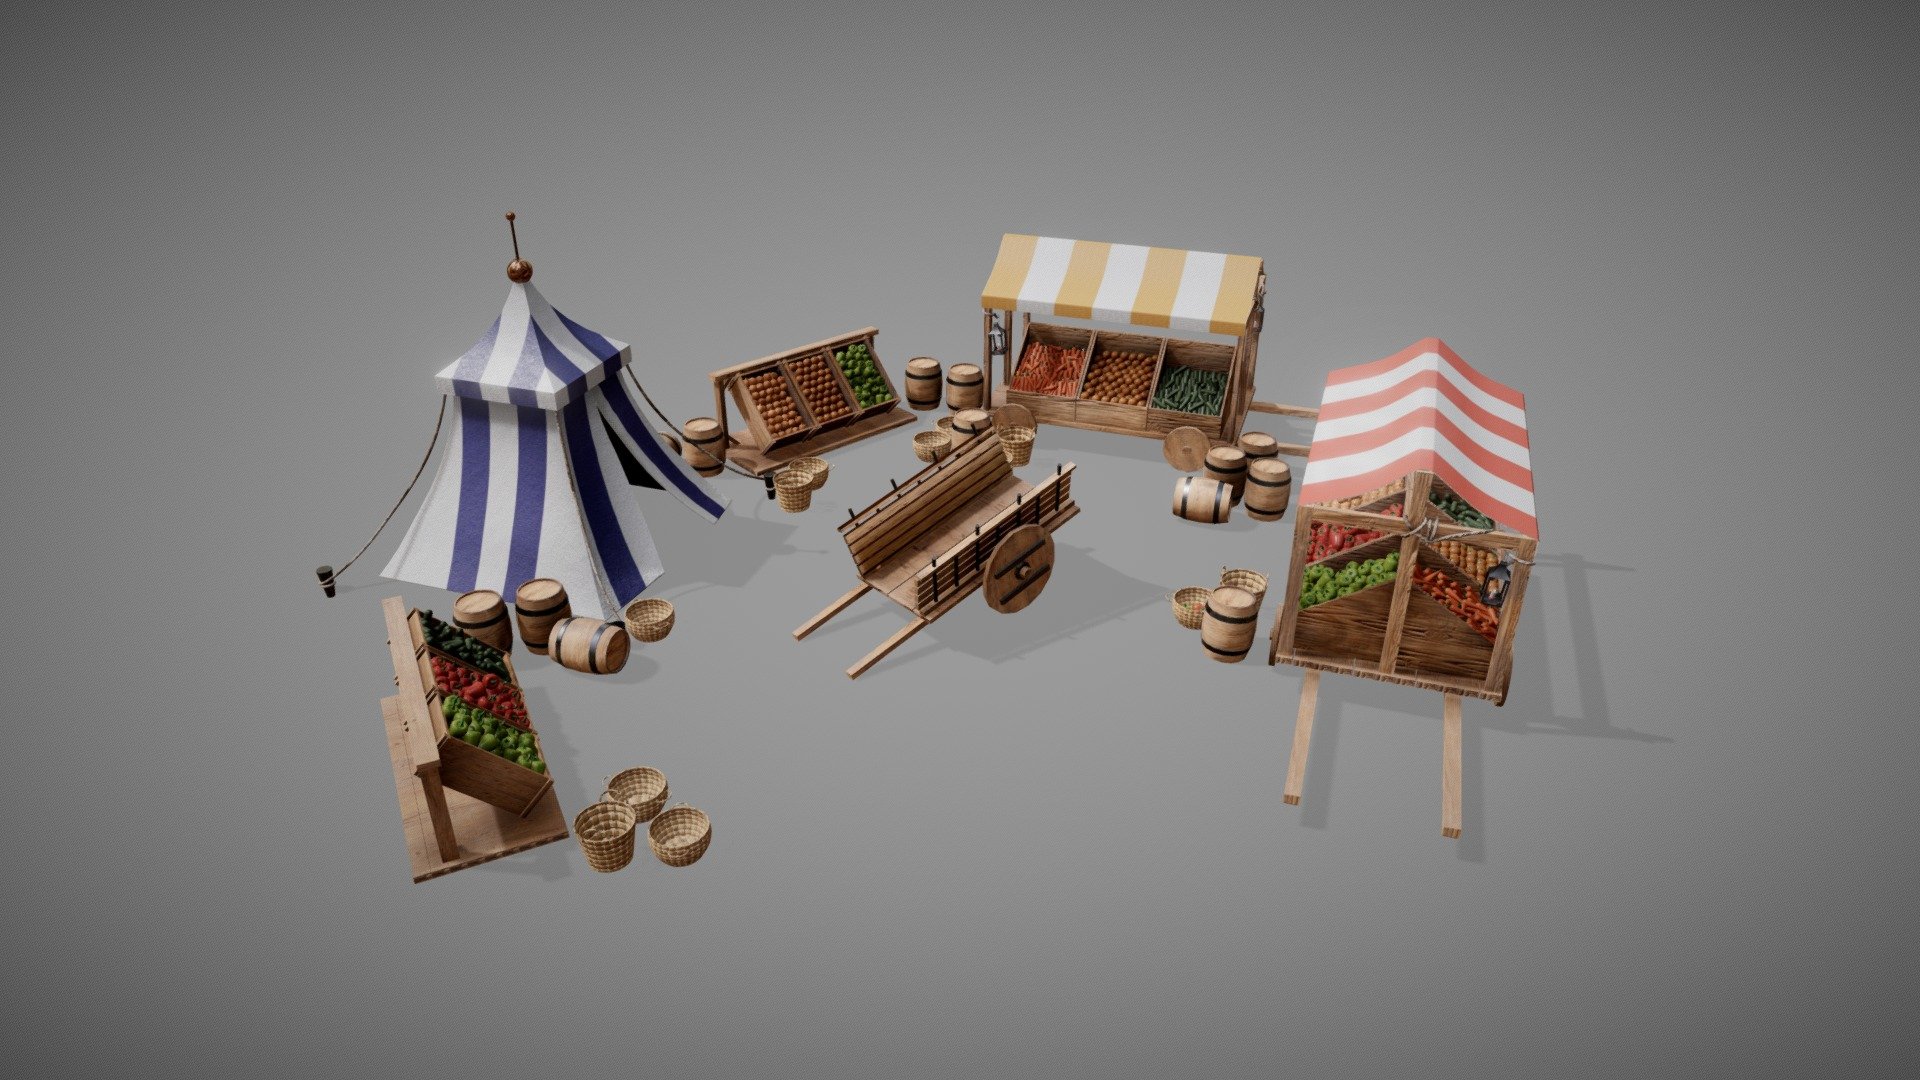 Farmer's Market / Market Place where all the goods at.
Some argue that it is not in our day 3d model